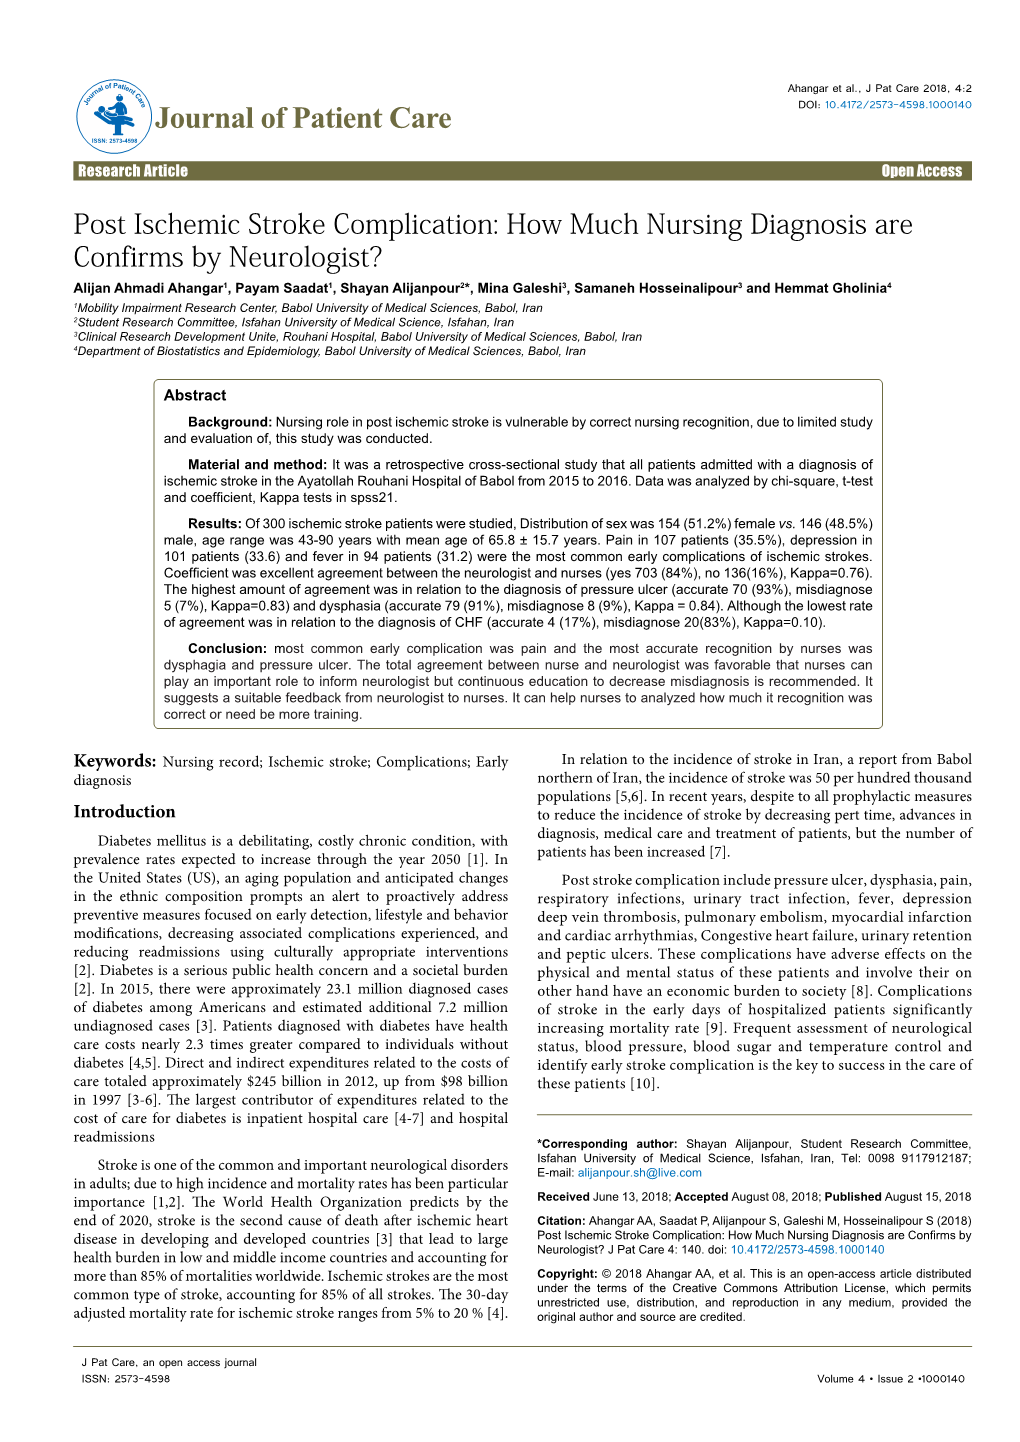 Post Ischemic Stroke Complication: How Much Nursing Diagnosis Are Confirms by Neurologist?